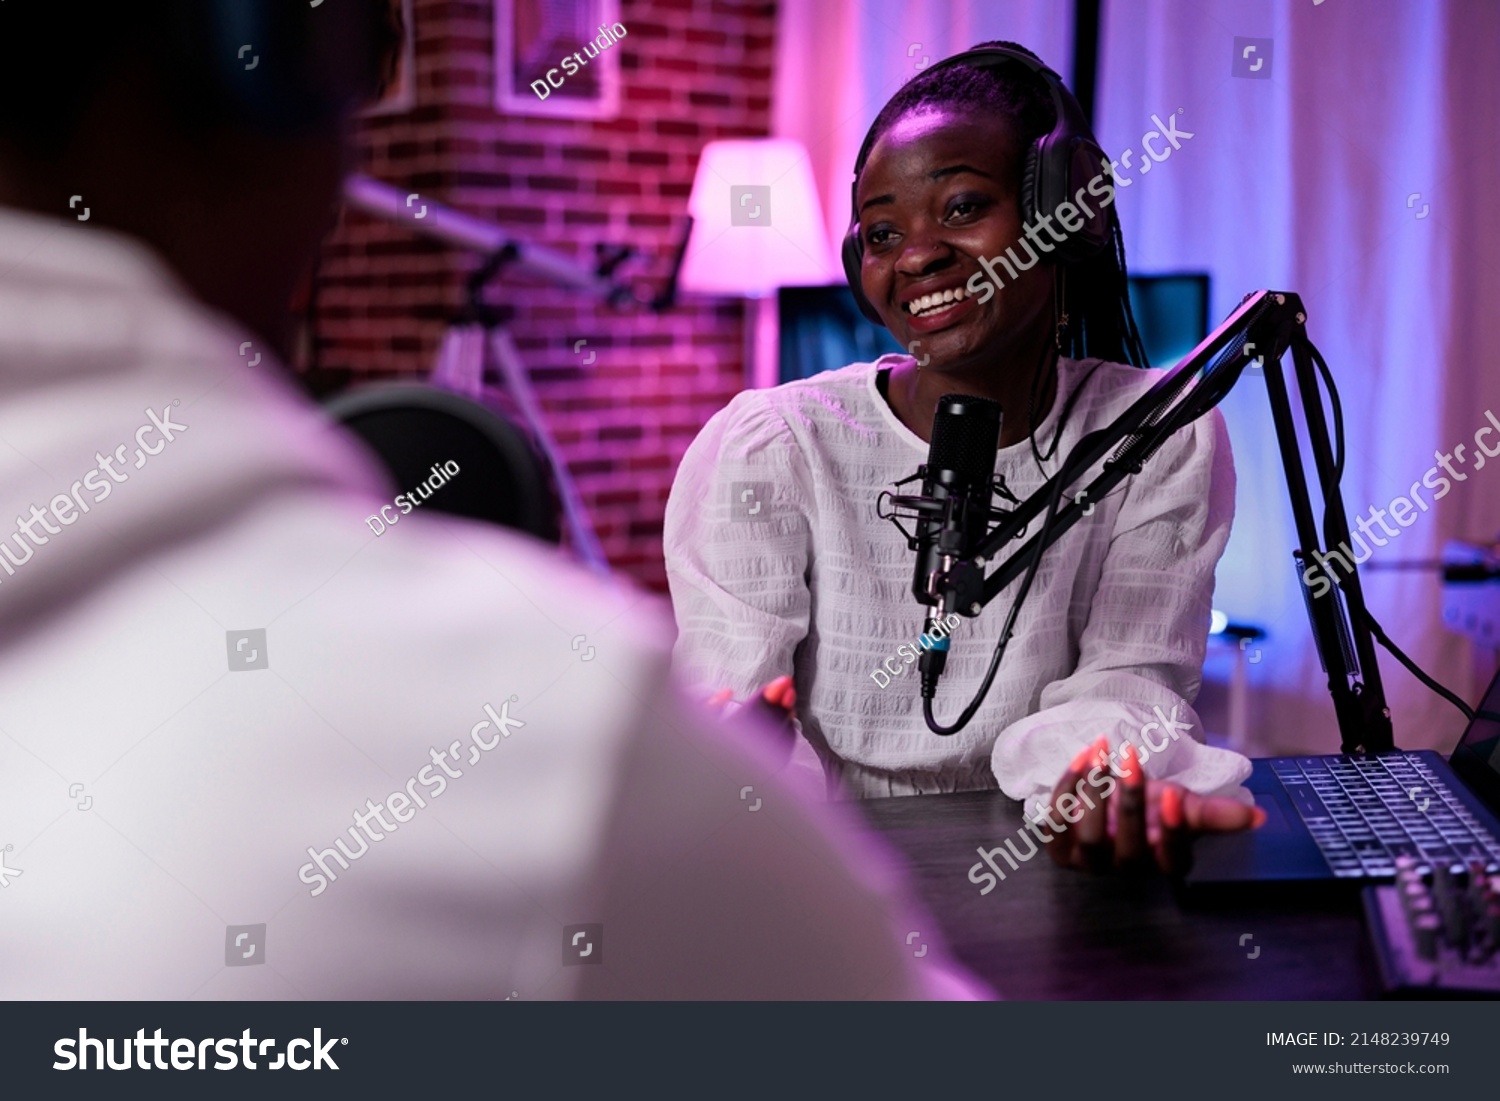 Female vlogger interviewing male guest on podcast show, using recording equipment. Happy woman streaming live broadcast episode with man in studio to record conversation for channel. #2148239749